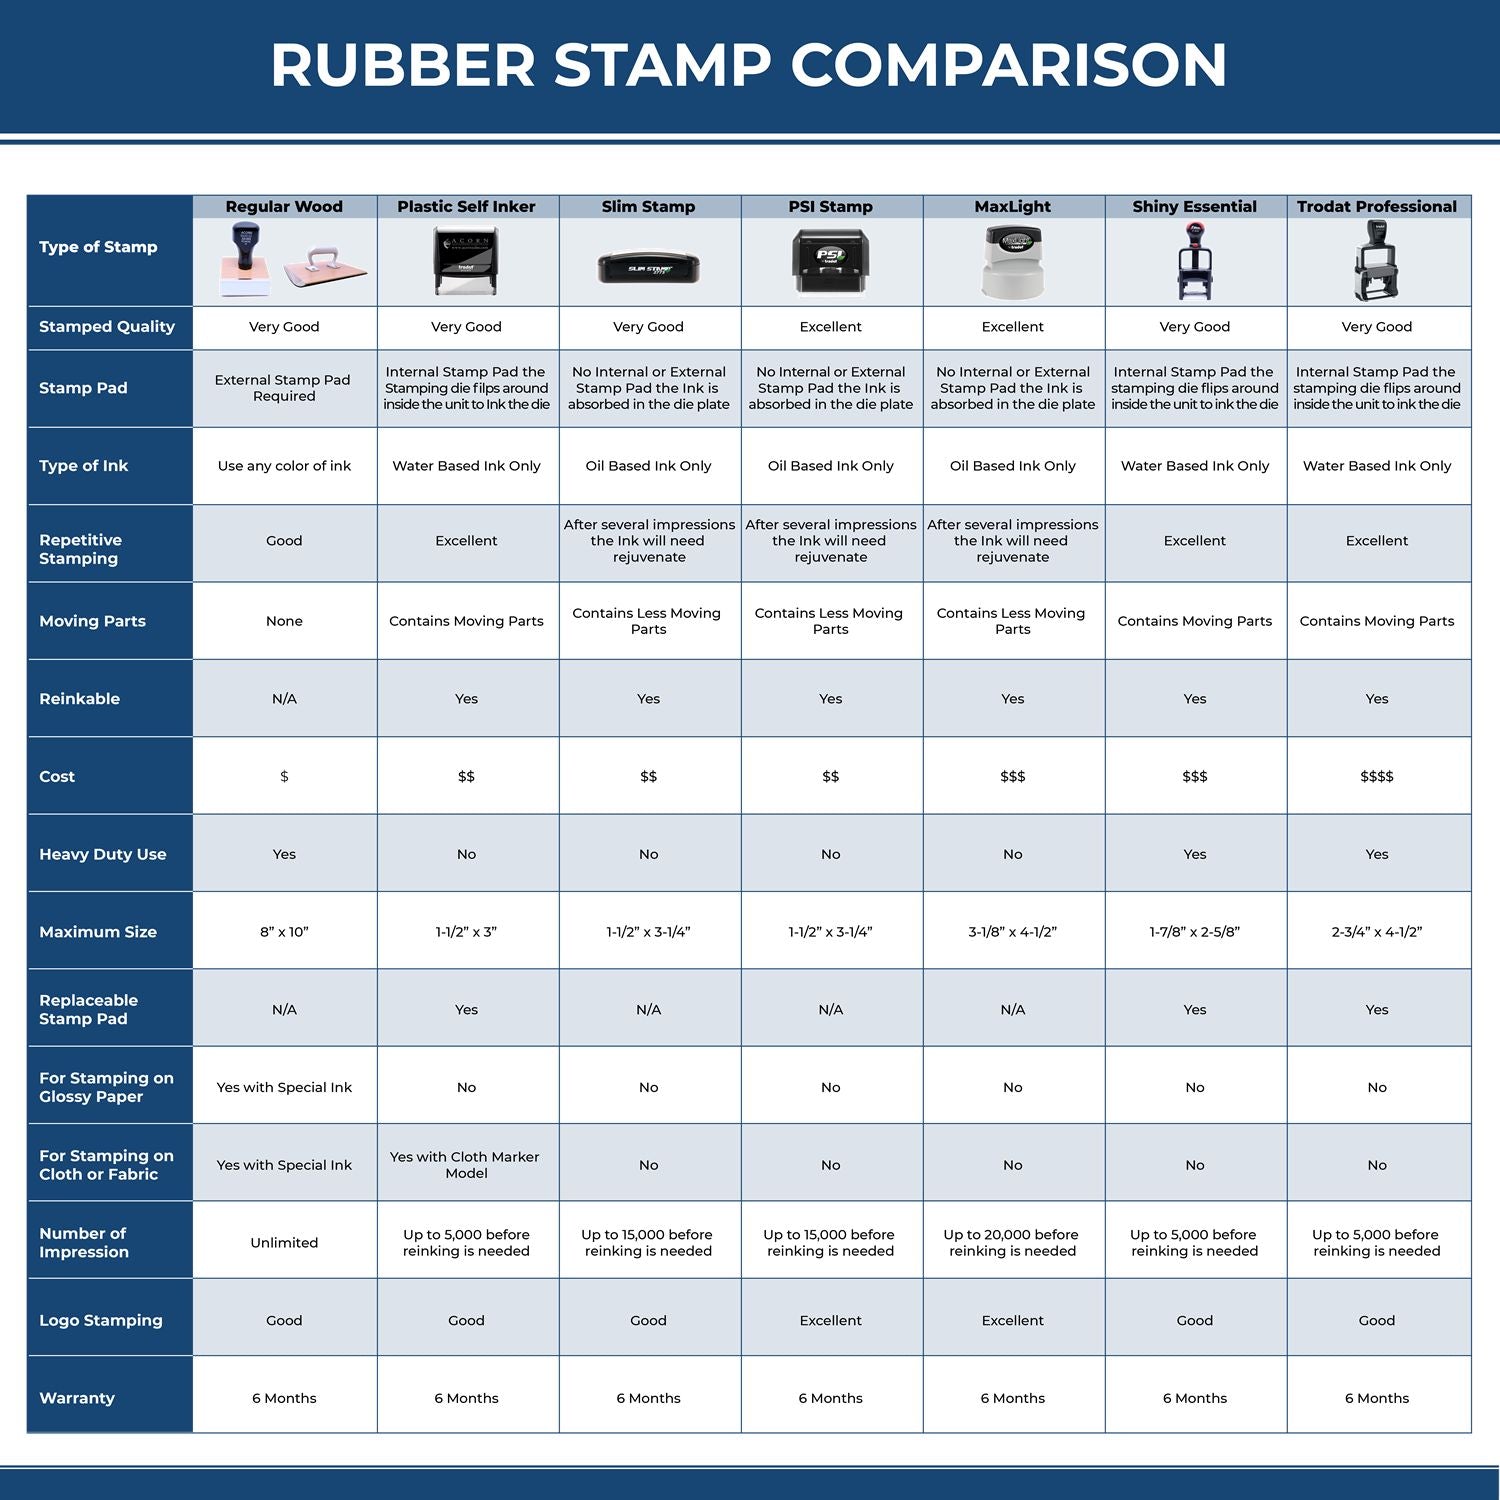 A comparison chart for the different types of mount models available for the Self-Inking Connecticut PE Stamp.